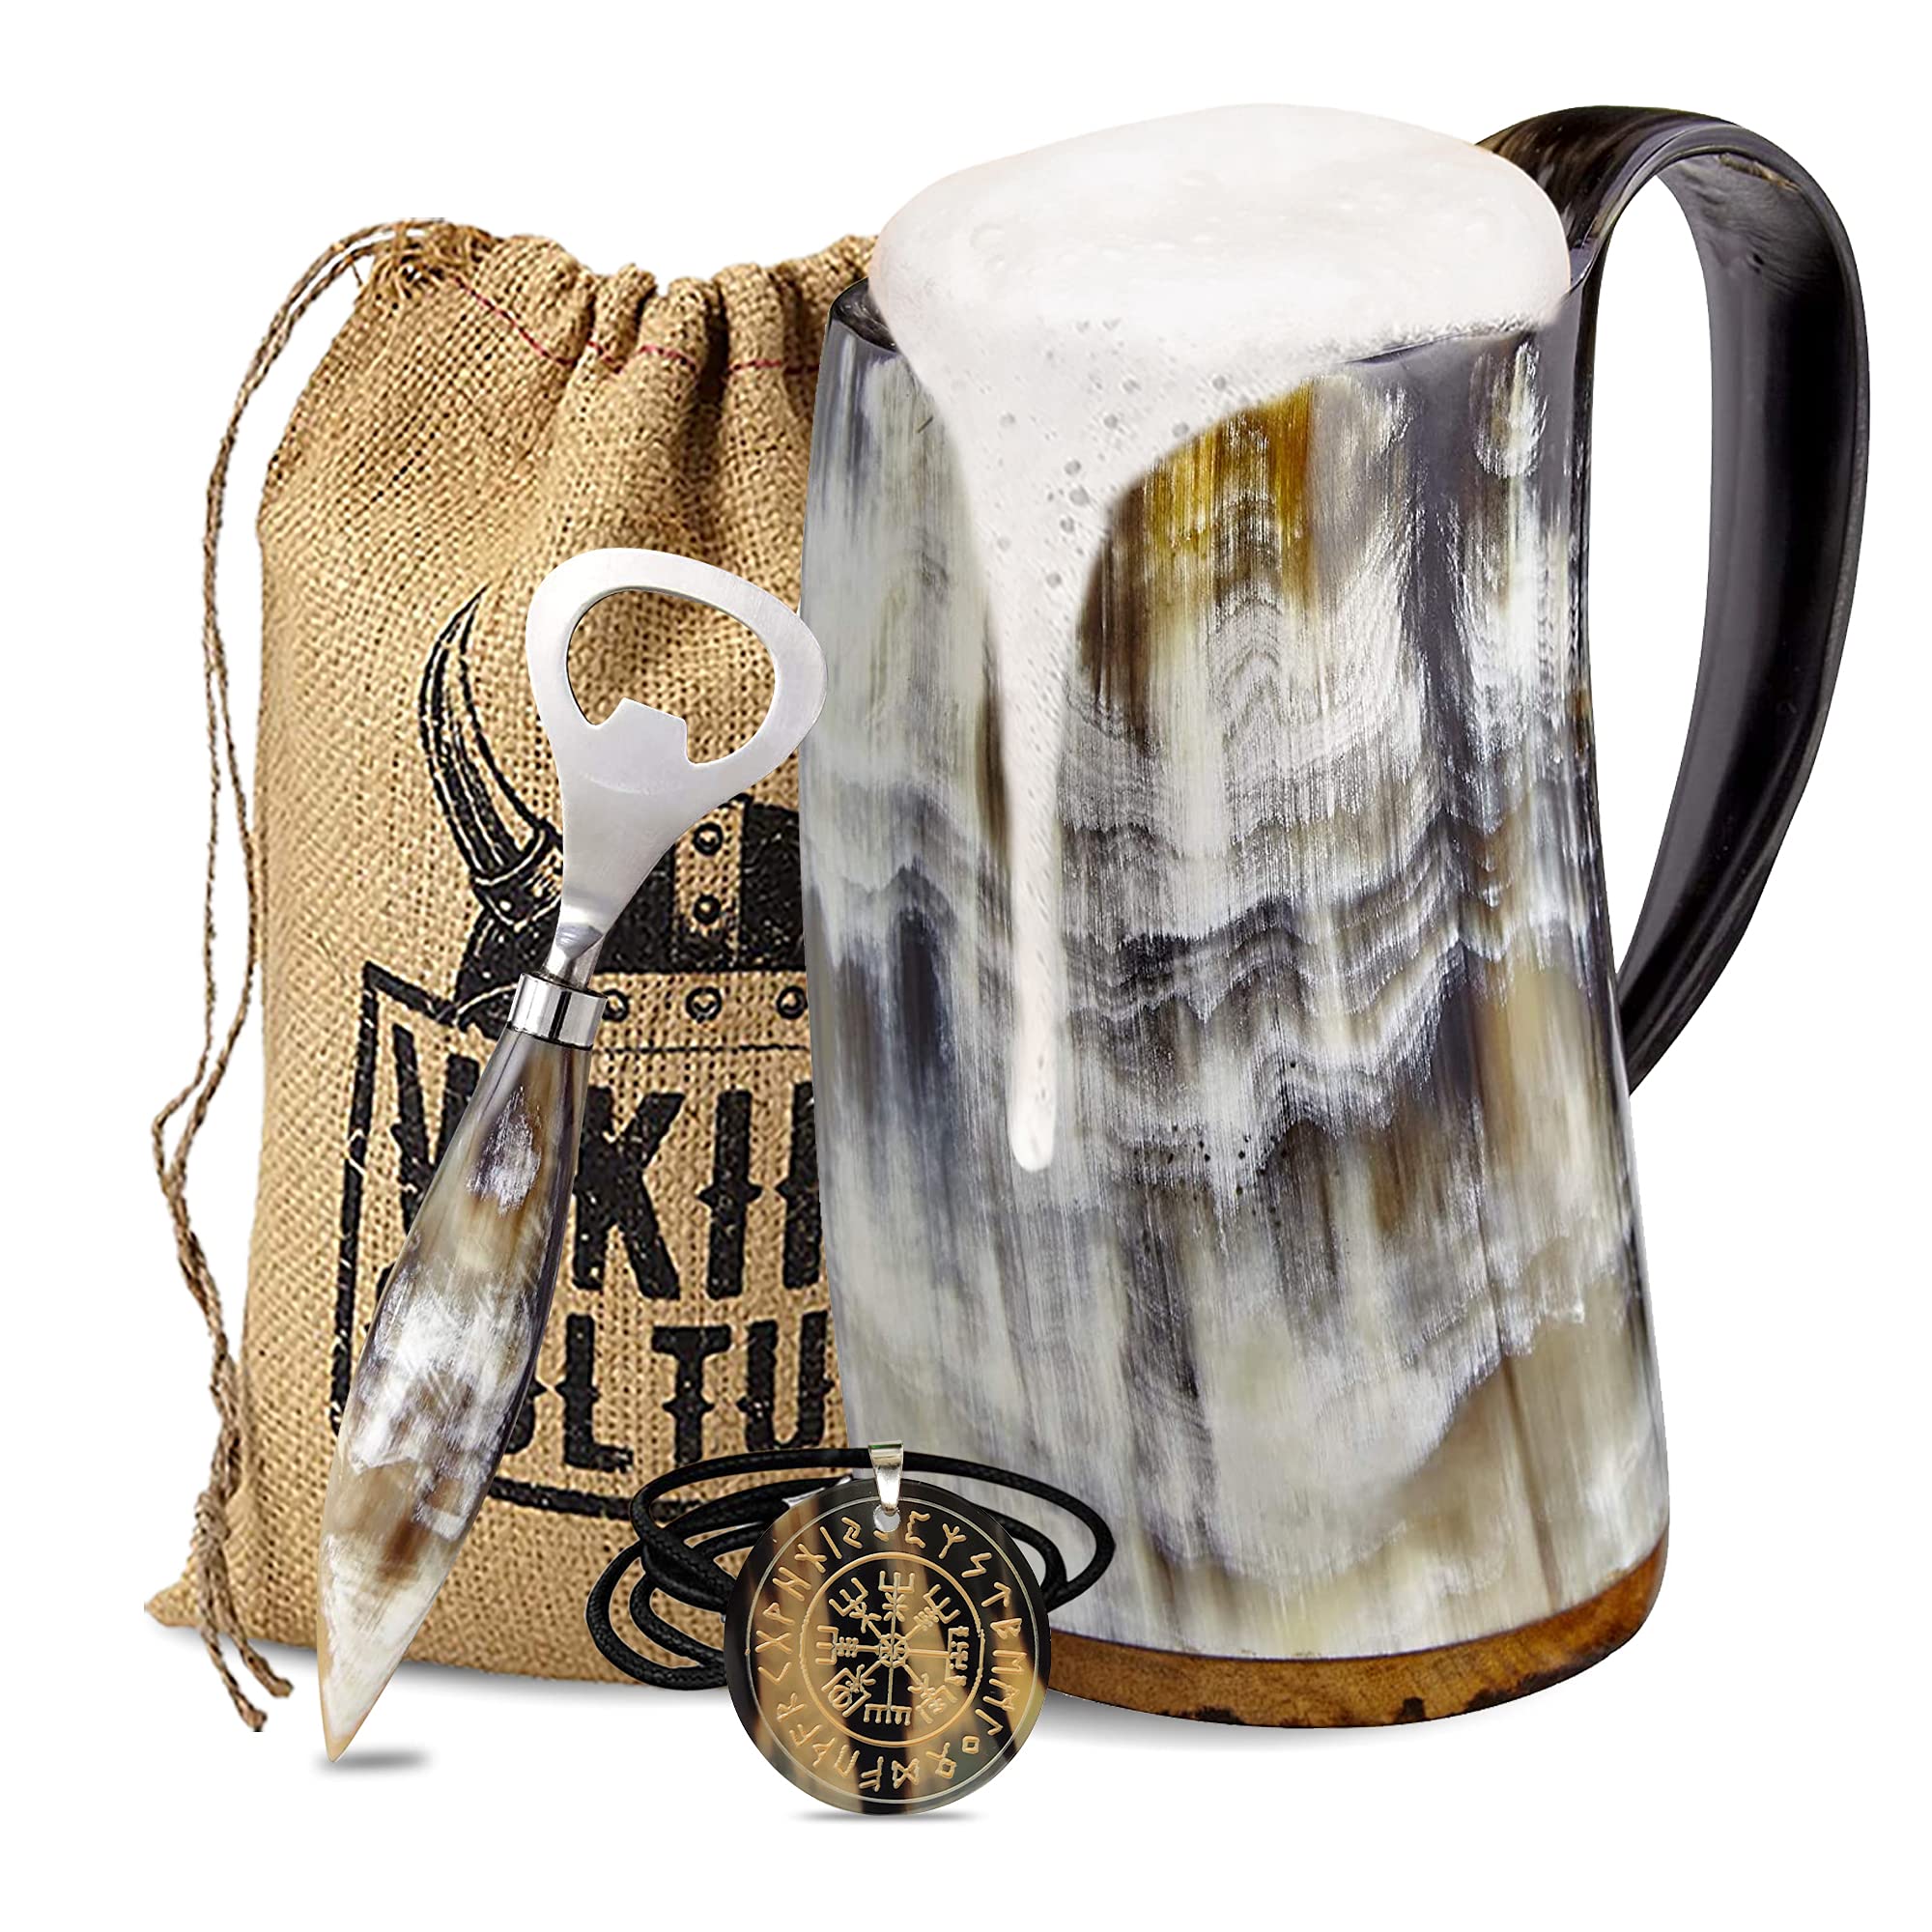 Viking Culture Ox Horn Mug, Norse Pendant, and Bottle Opener (3 Pc. Set) Authentic 32-oz. Ale, Mead, and Beer Tankard | Vintage Stein with Handle | - Polished Finish | Without Design